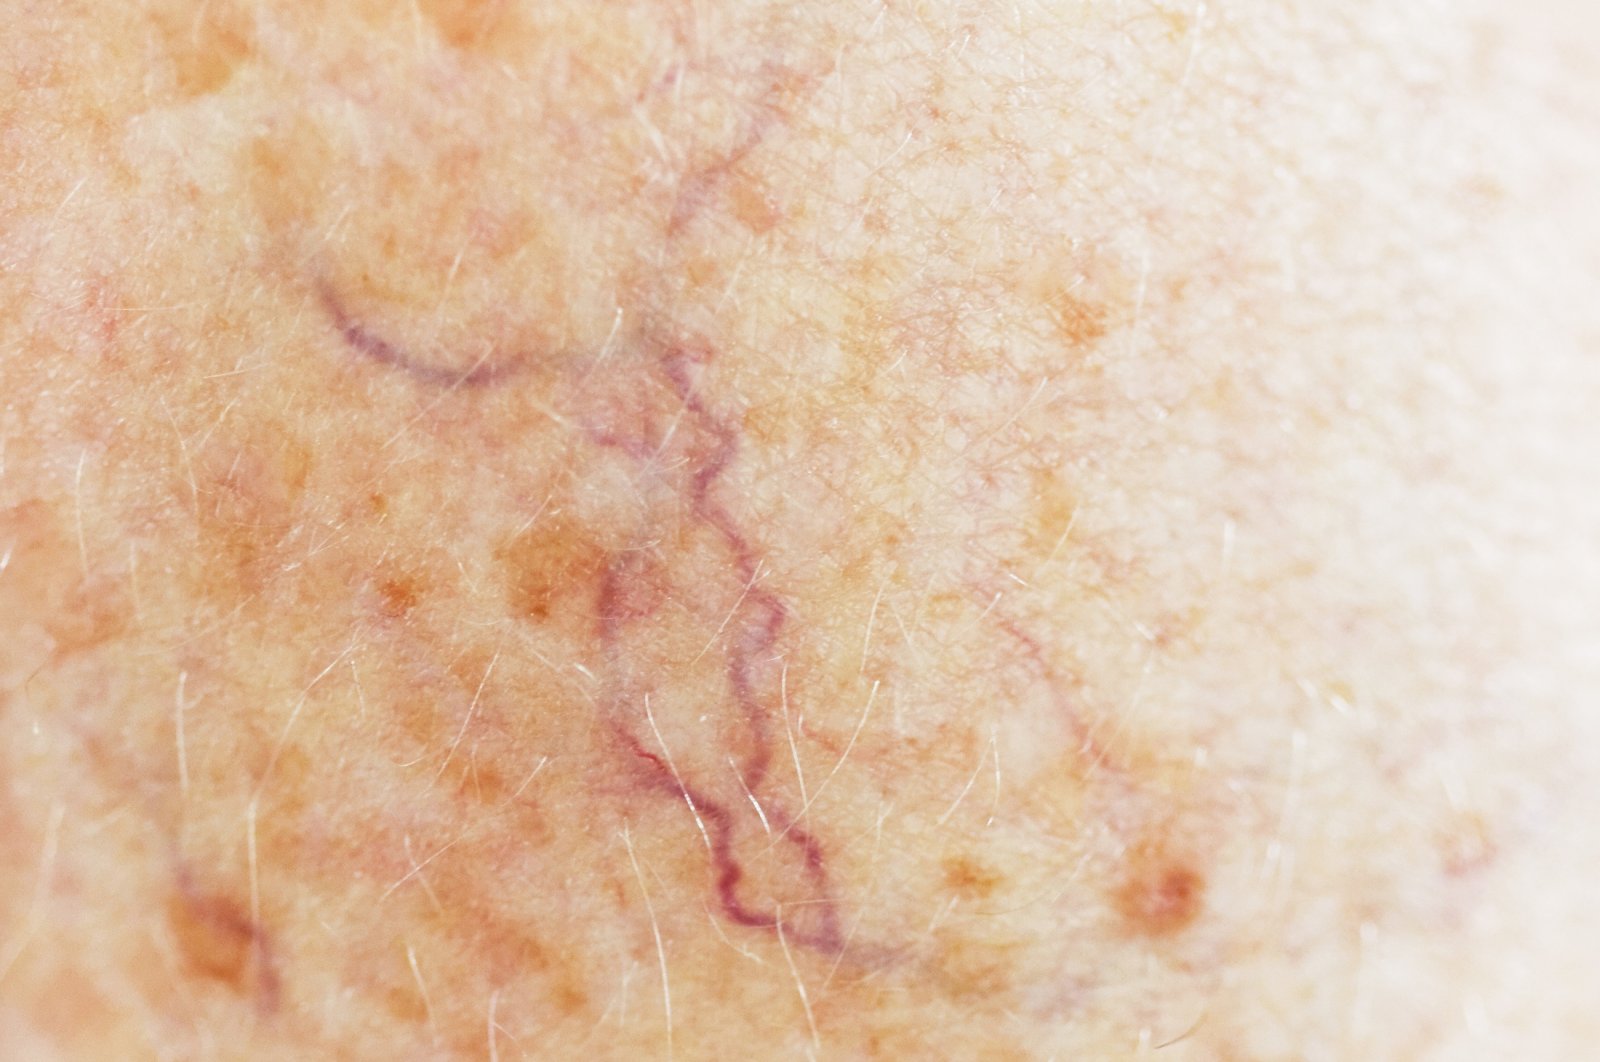 Small, widened blood vessels on the skin are usually harmless but can be associated with several diseases and require surgical intervention. (Getty Images Photo)